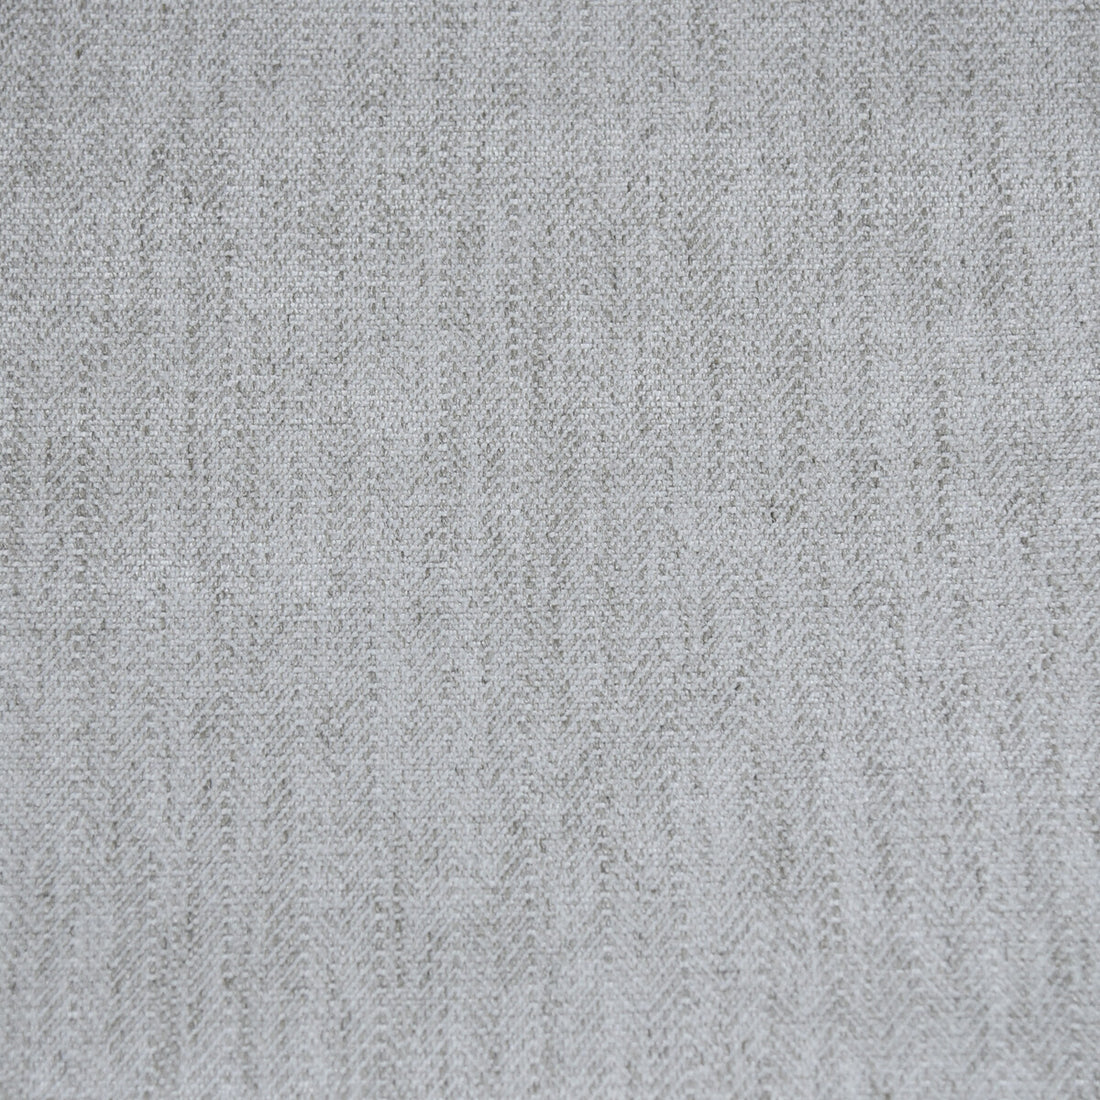 Taste Maker fabric in grey color - pattern 35184.11.0 - by Kravet Couture in the David Phoenix Well-Suited collection